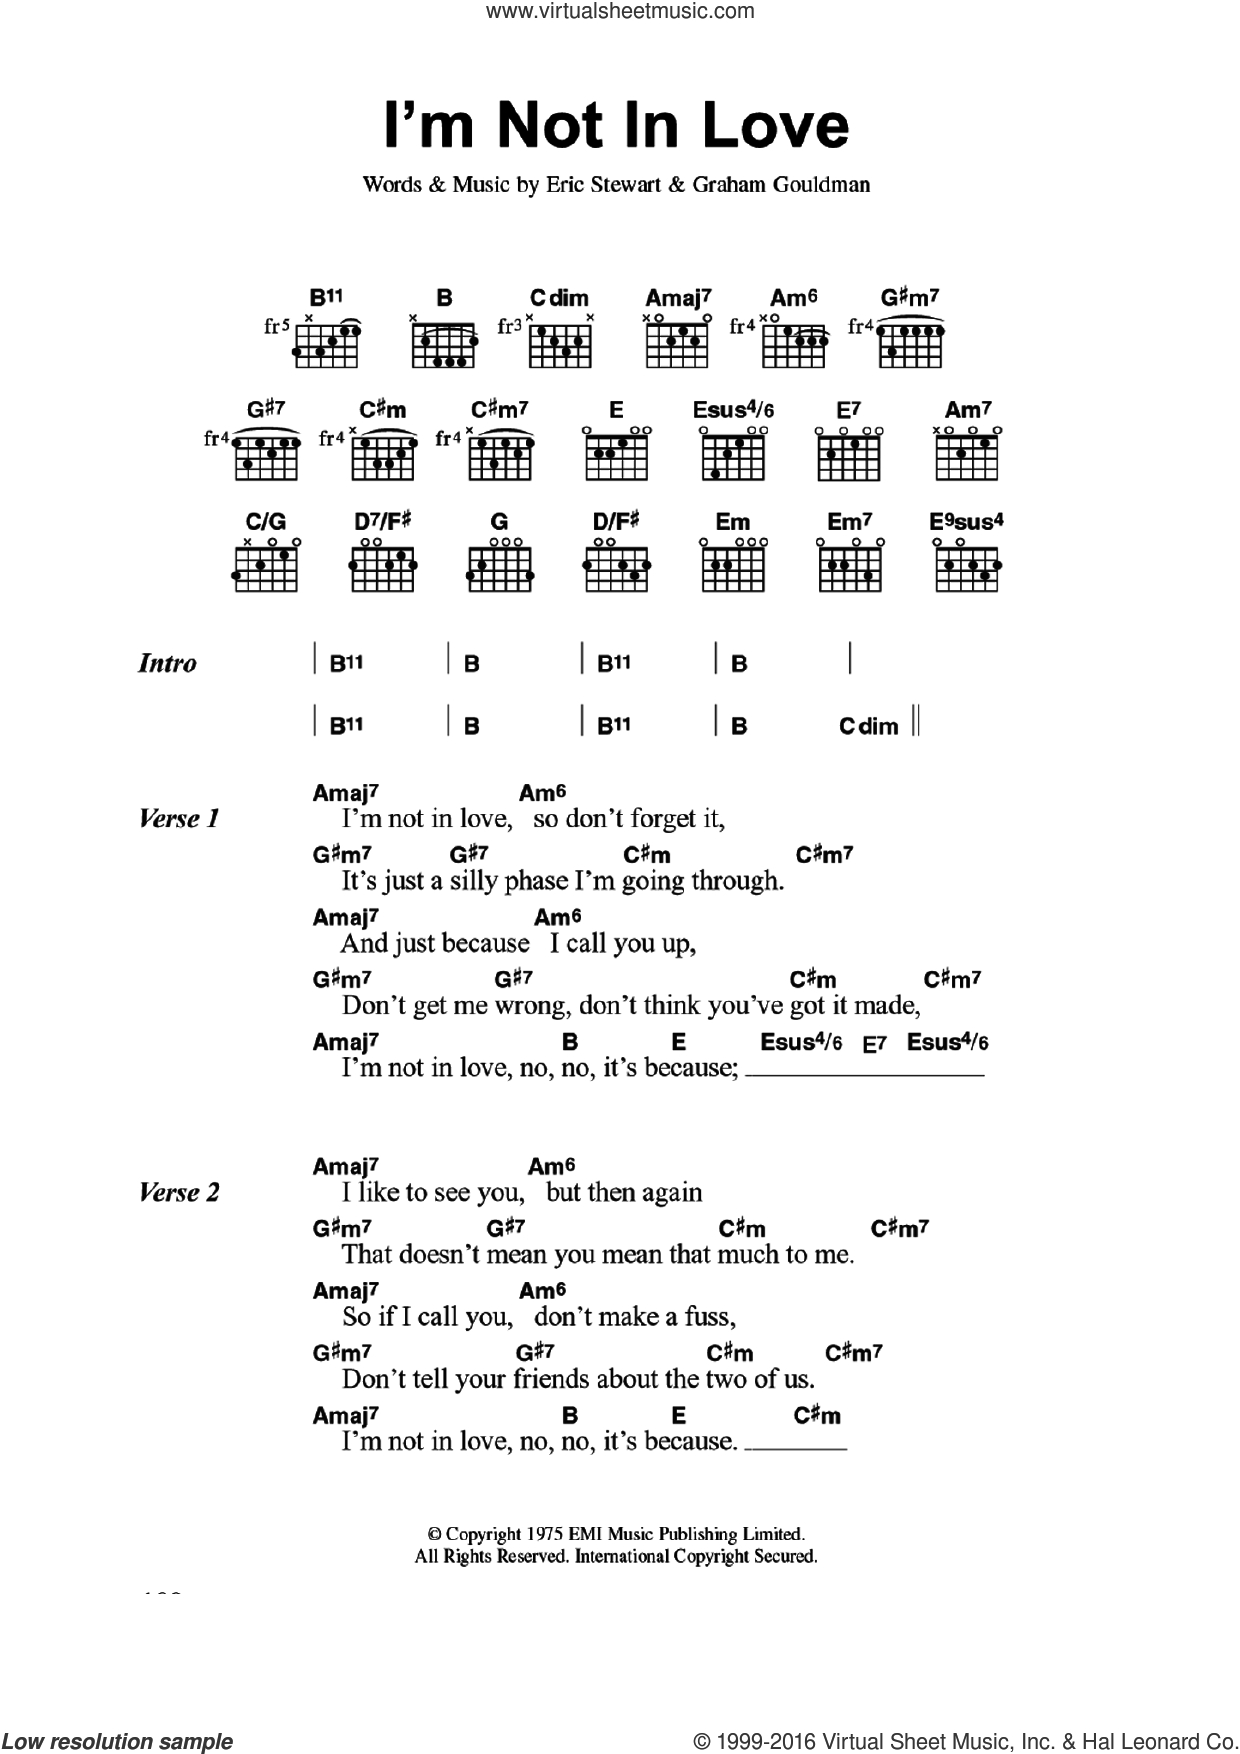 What's Going On Chords 10cc Im Not In Love Sheet Music For Guitar Chords Pdf